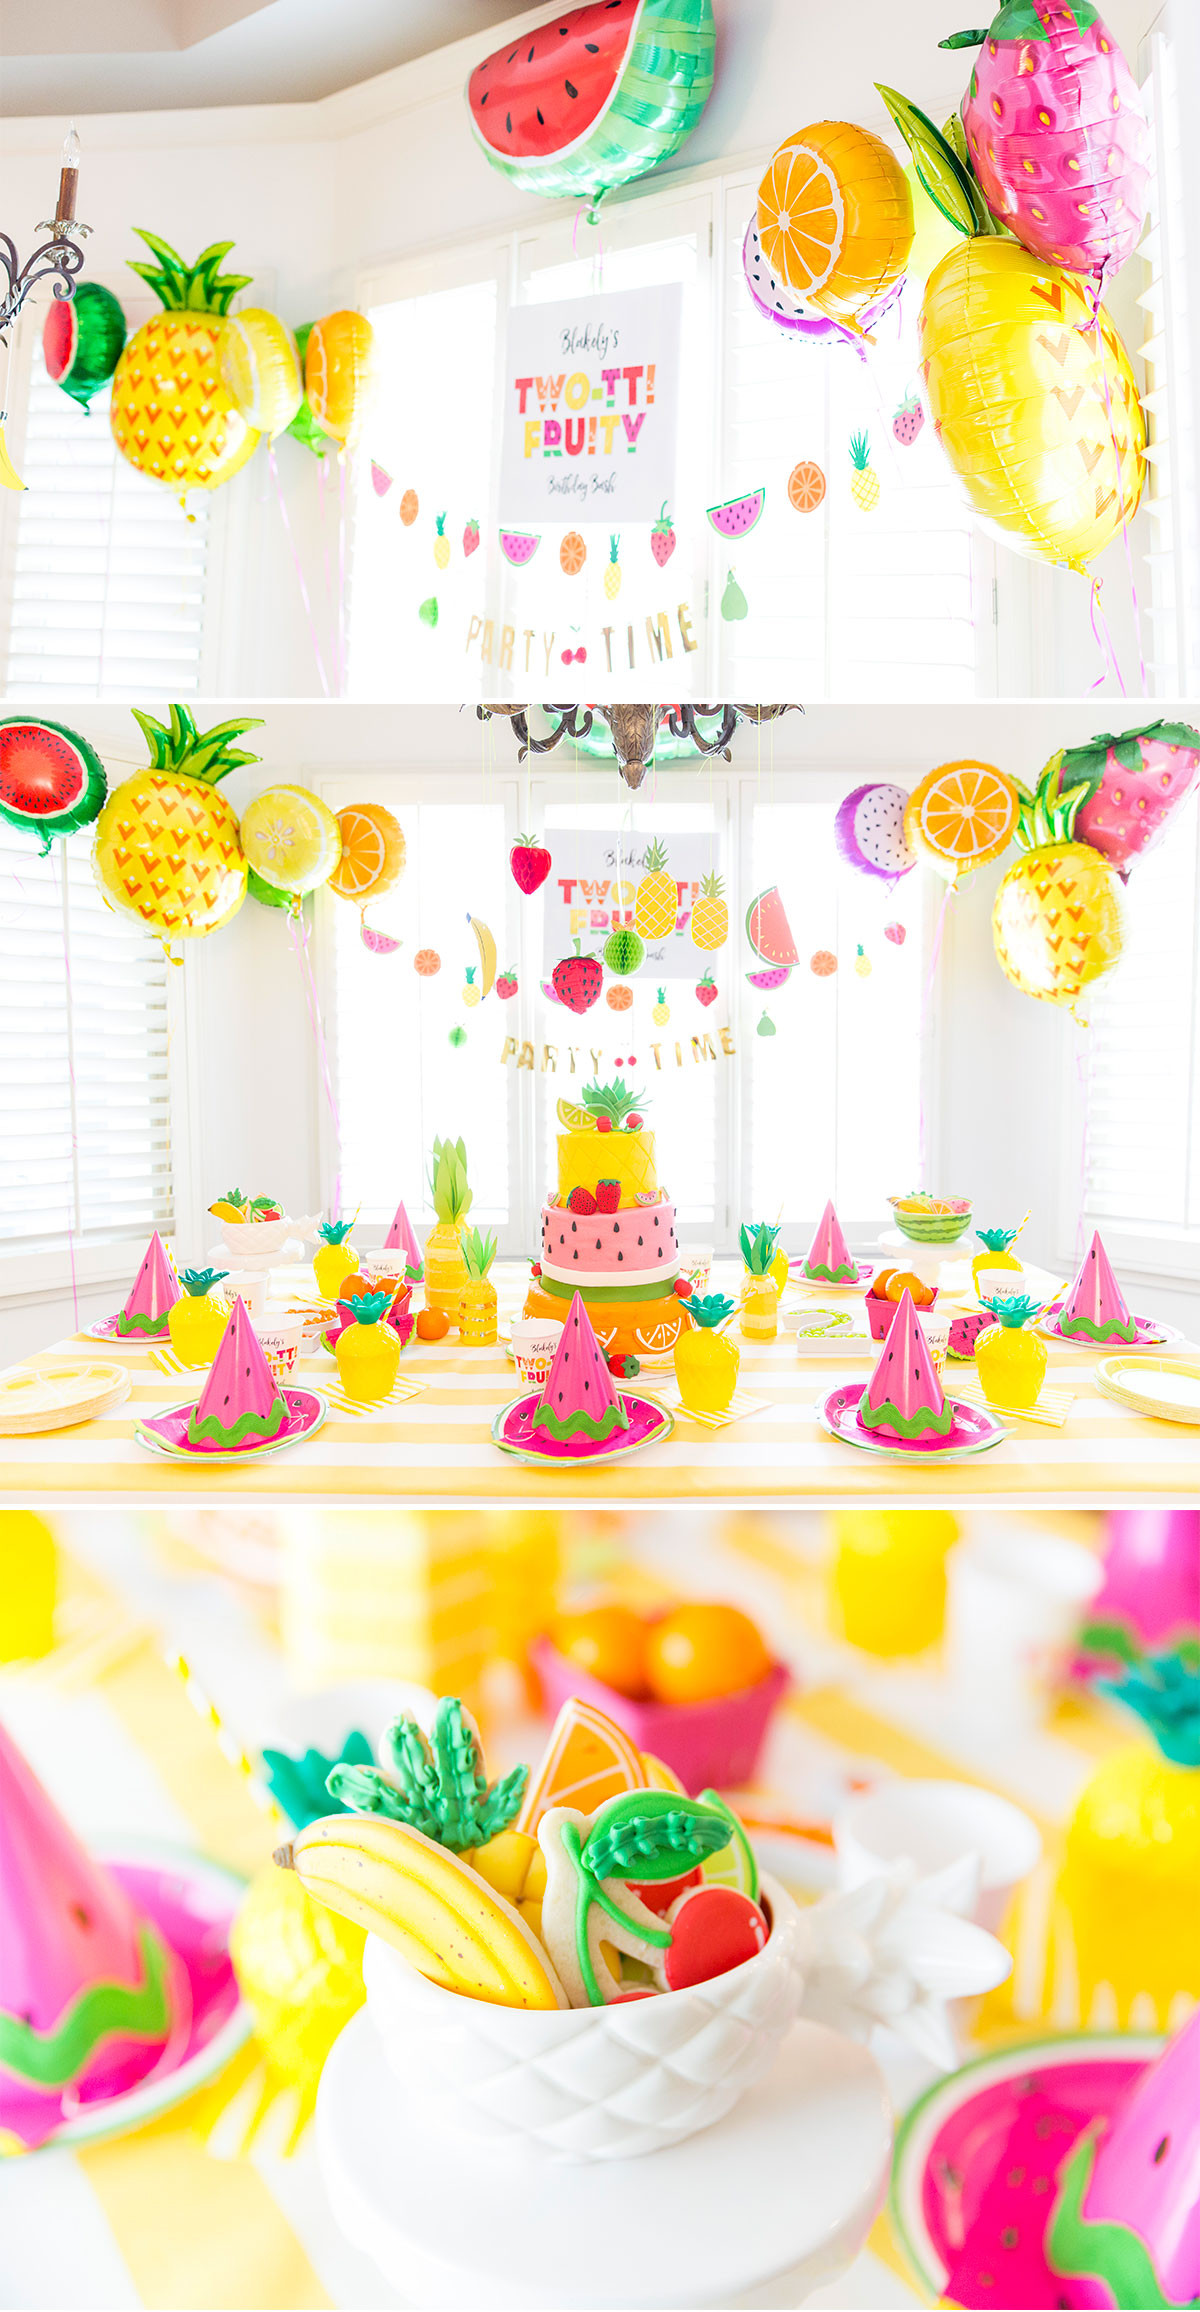 Pool Party Ideas For 2 Year Old
 Two tti Fruity Birthday Party Blakely Turns 2